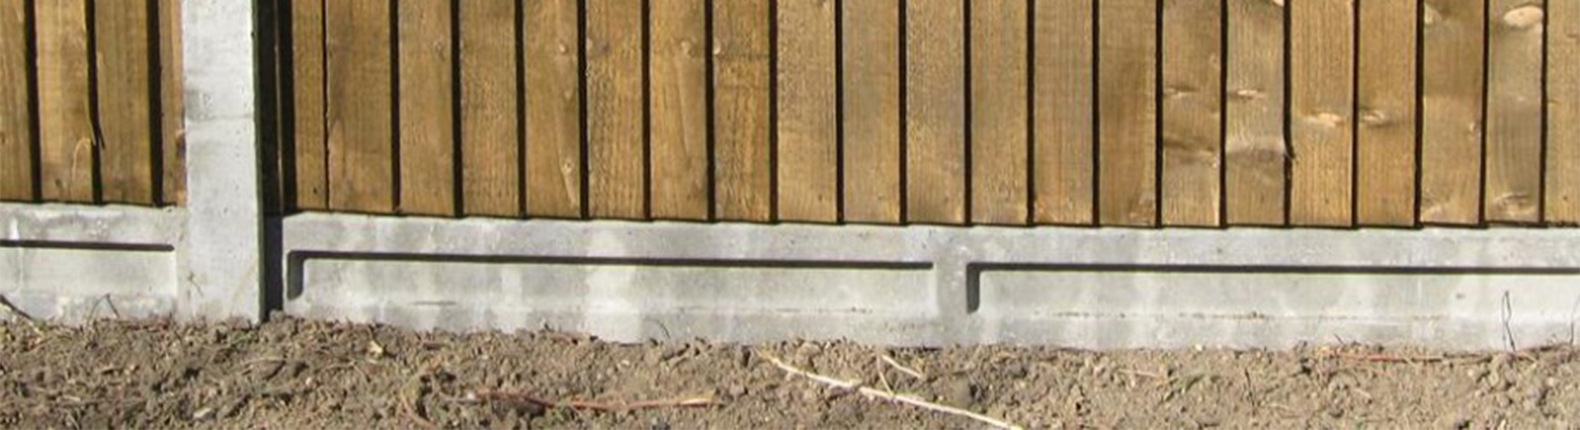 How to Install Concrete Fence Posts & Gravel Boards - AVS Fencing Supplies